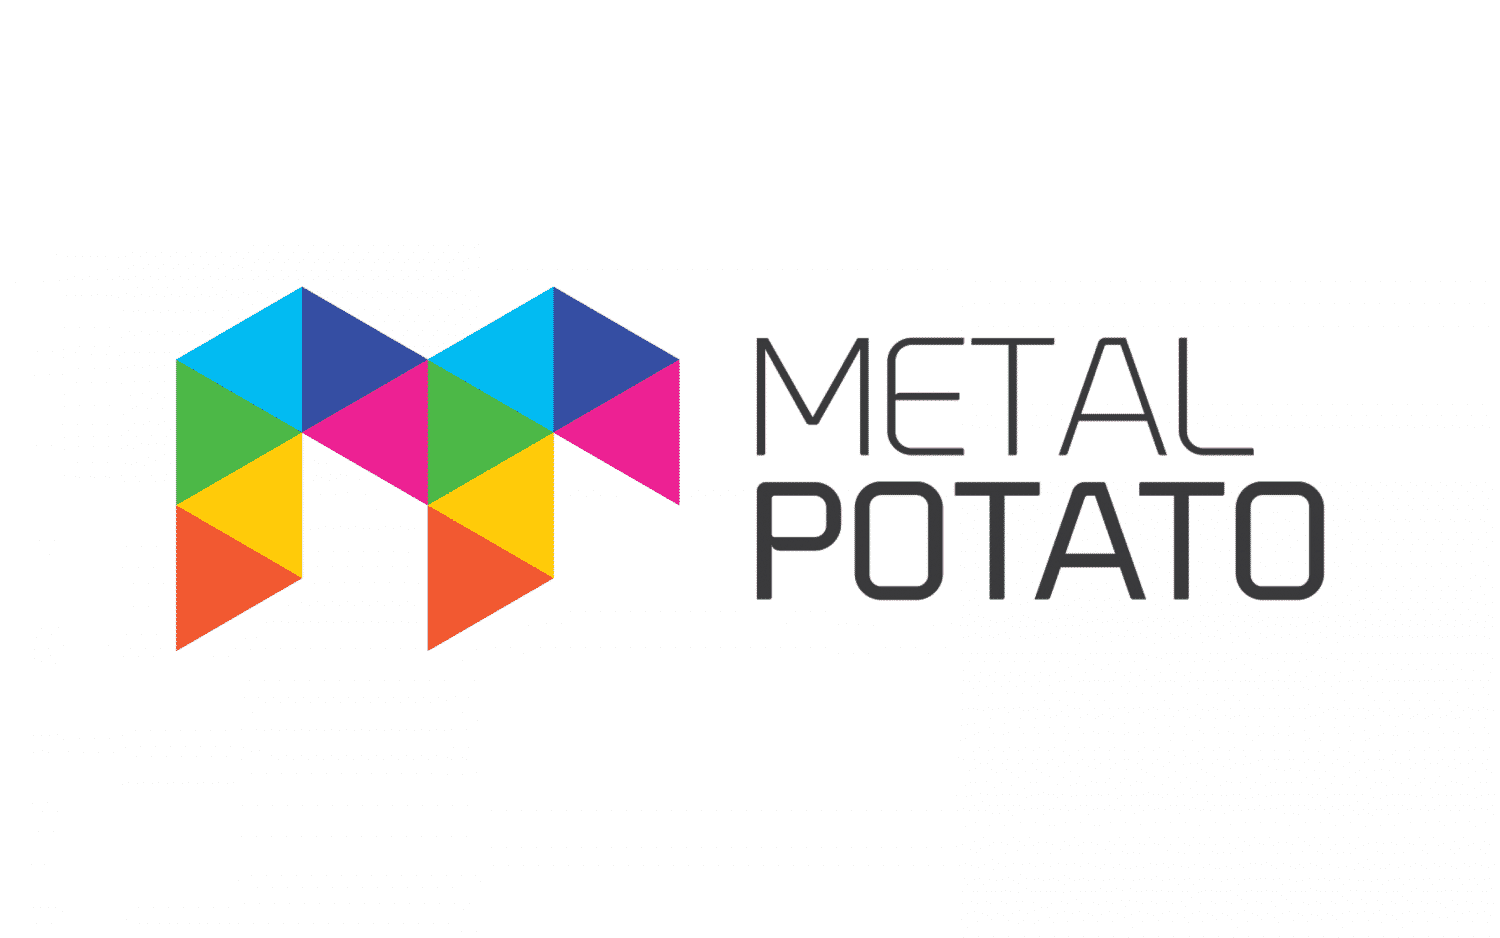 Metal Potato take over as our new website management team